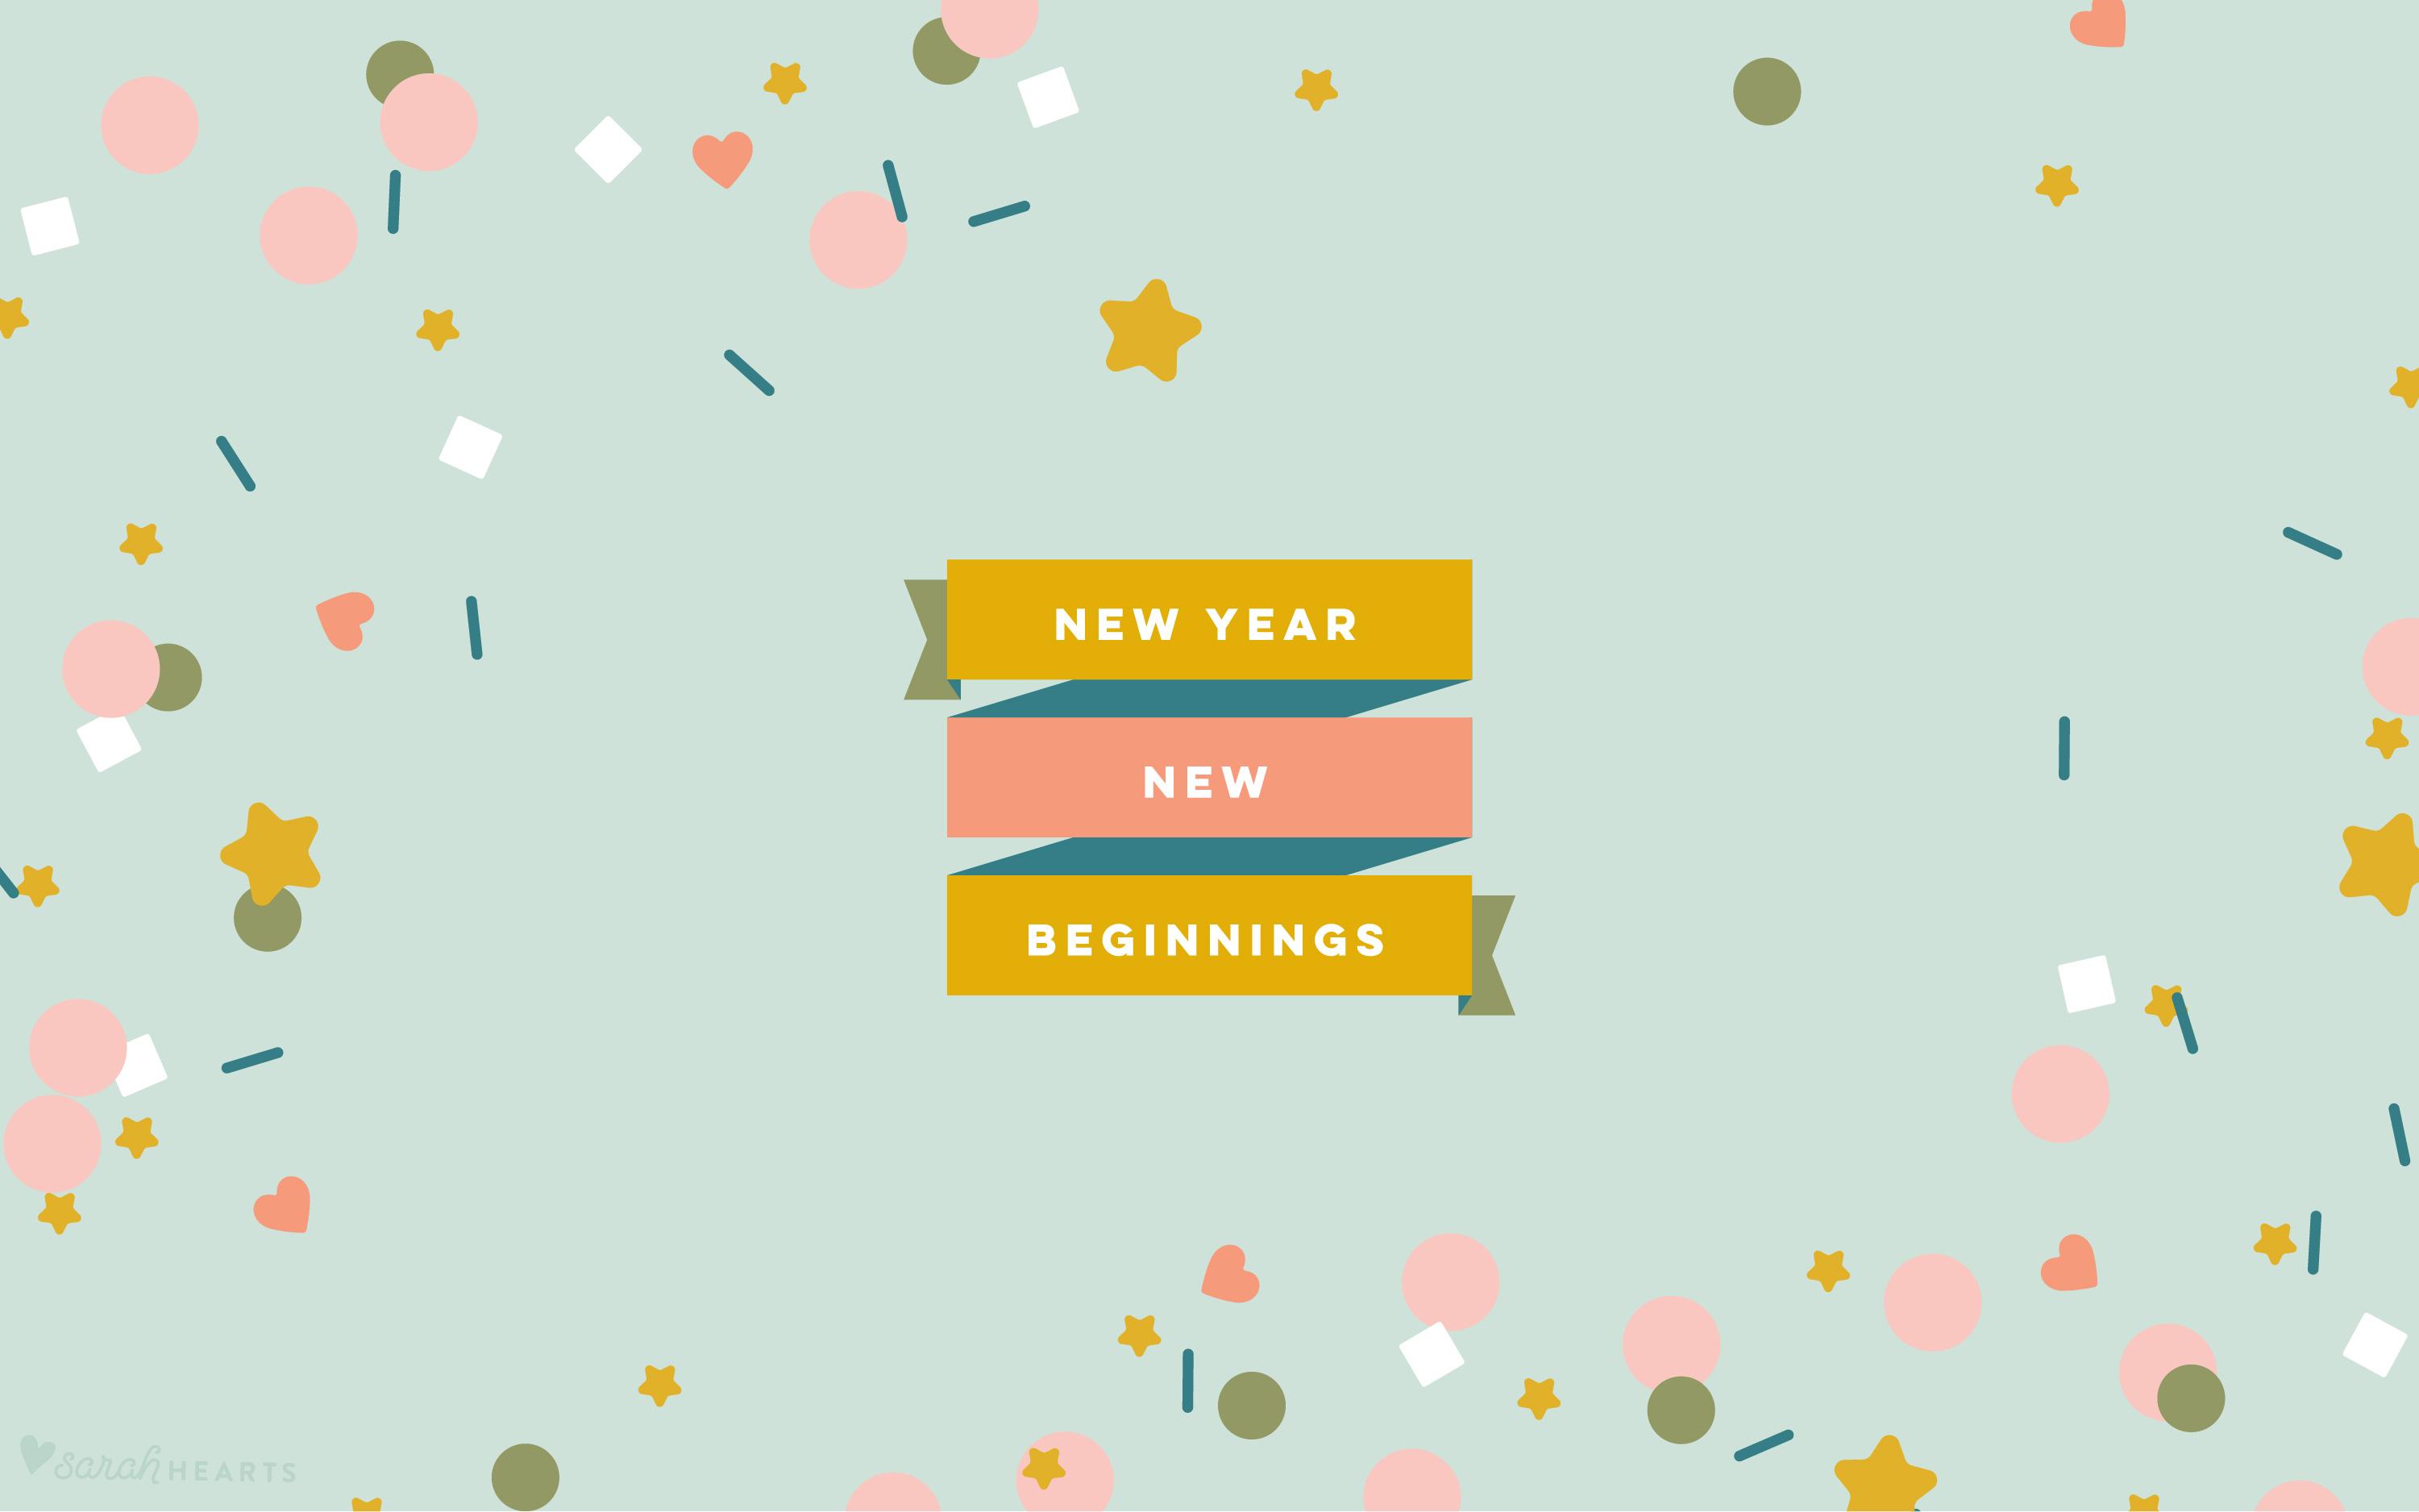 A new year's greeting with confetti and streamers - New Year, January